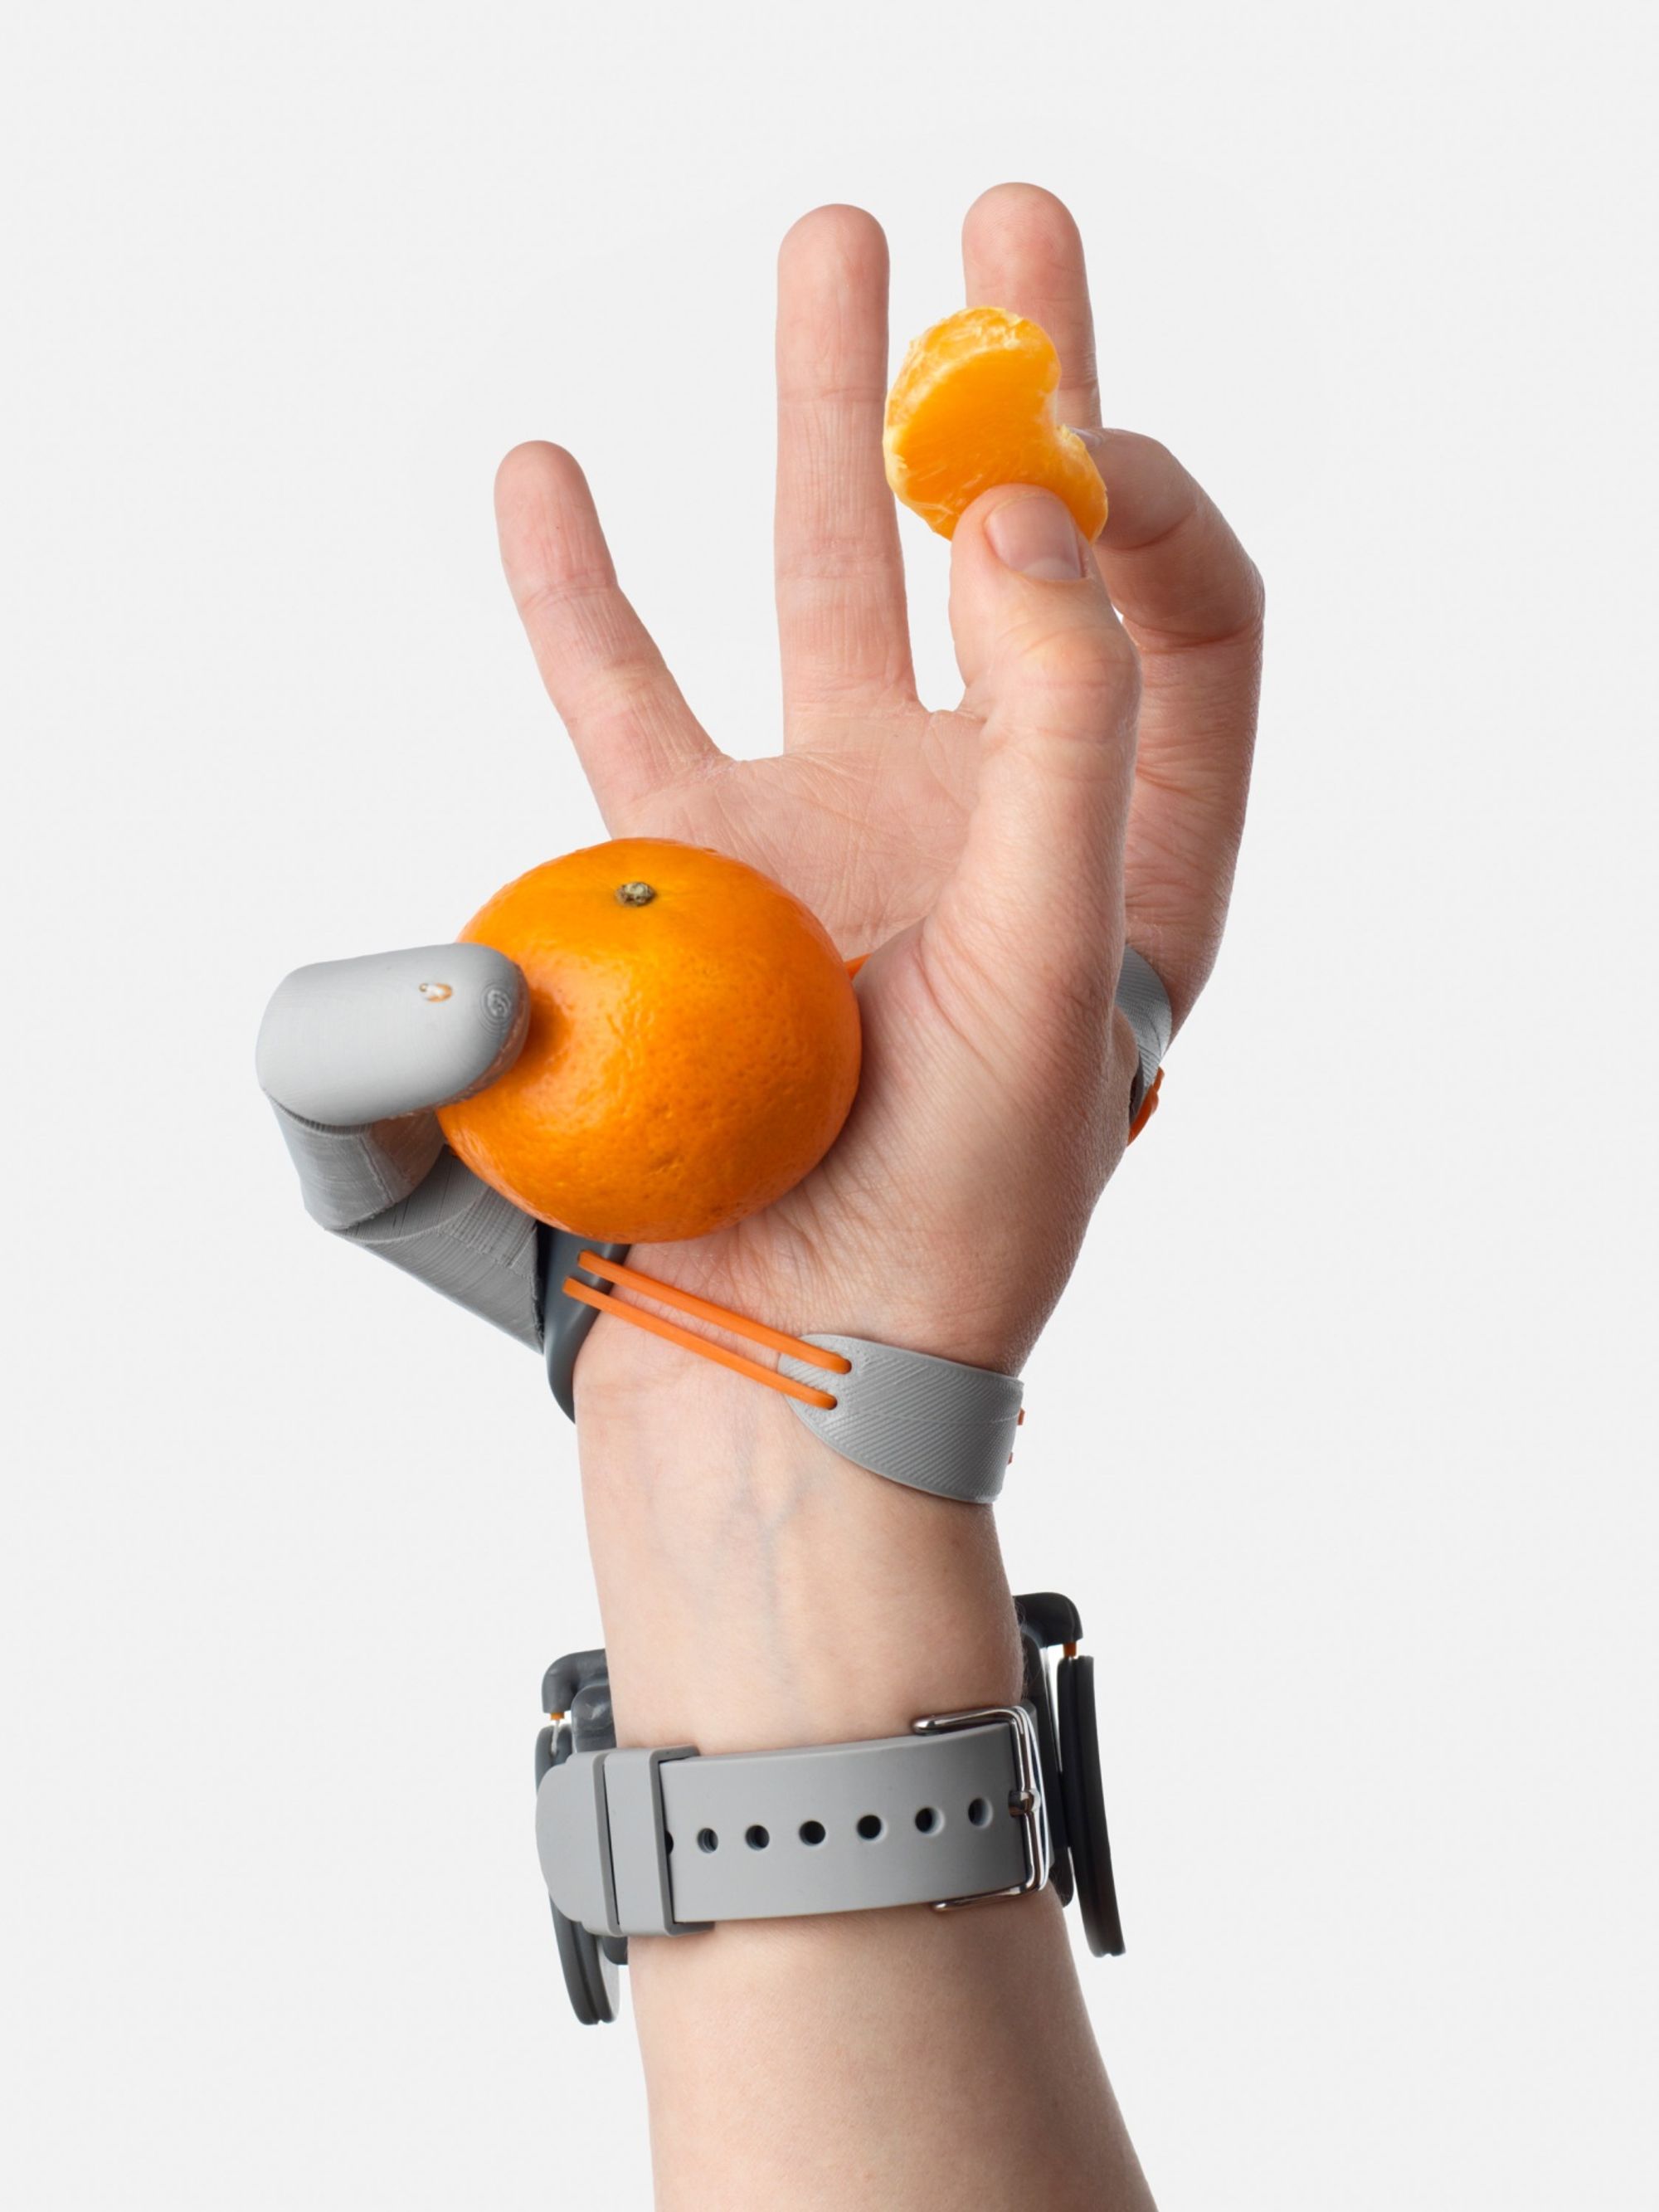 These prosthetics break the mold with third thumbs, spikes and superhero skins | MIT Technology Review